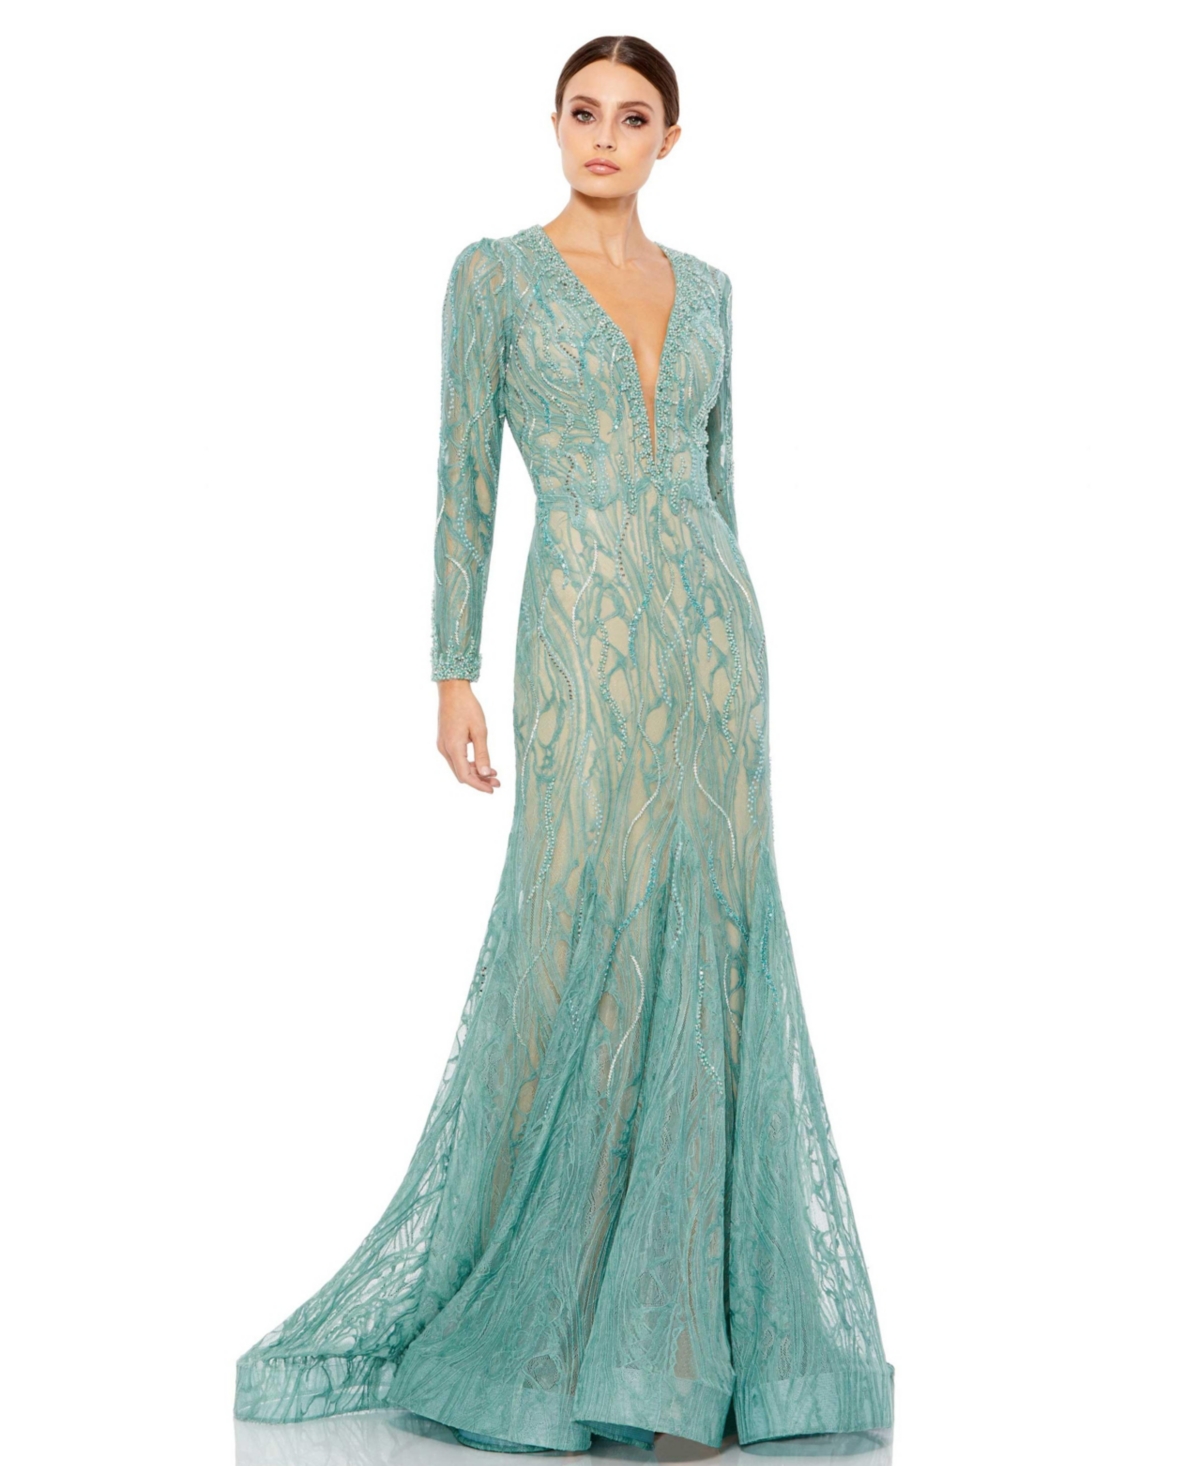 MAC DUGGAL WOMEN'S BEADED ILLUSION LONG SLEEVE PLUNGE NECK GOWN